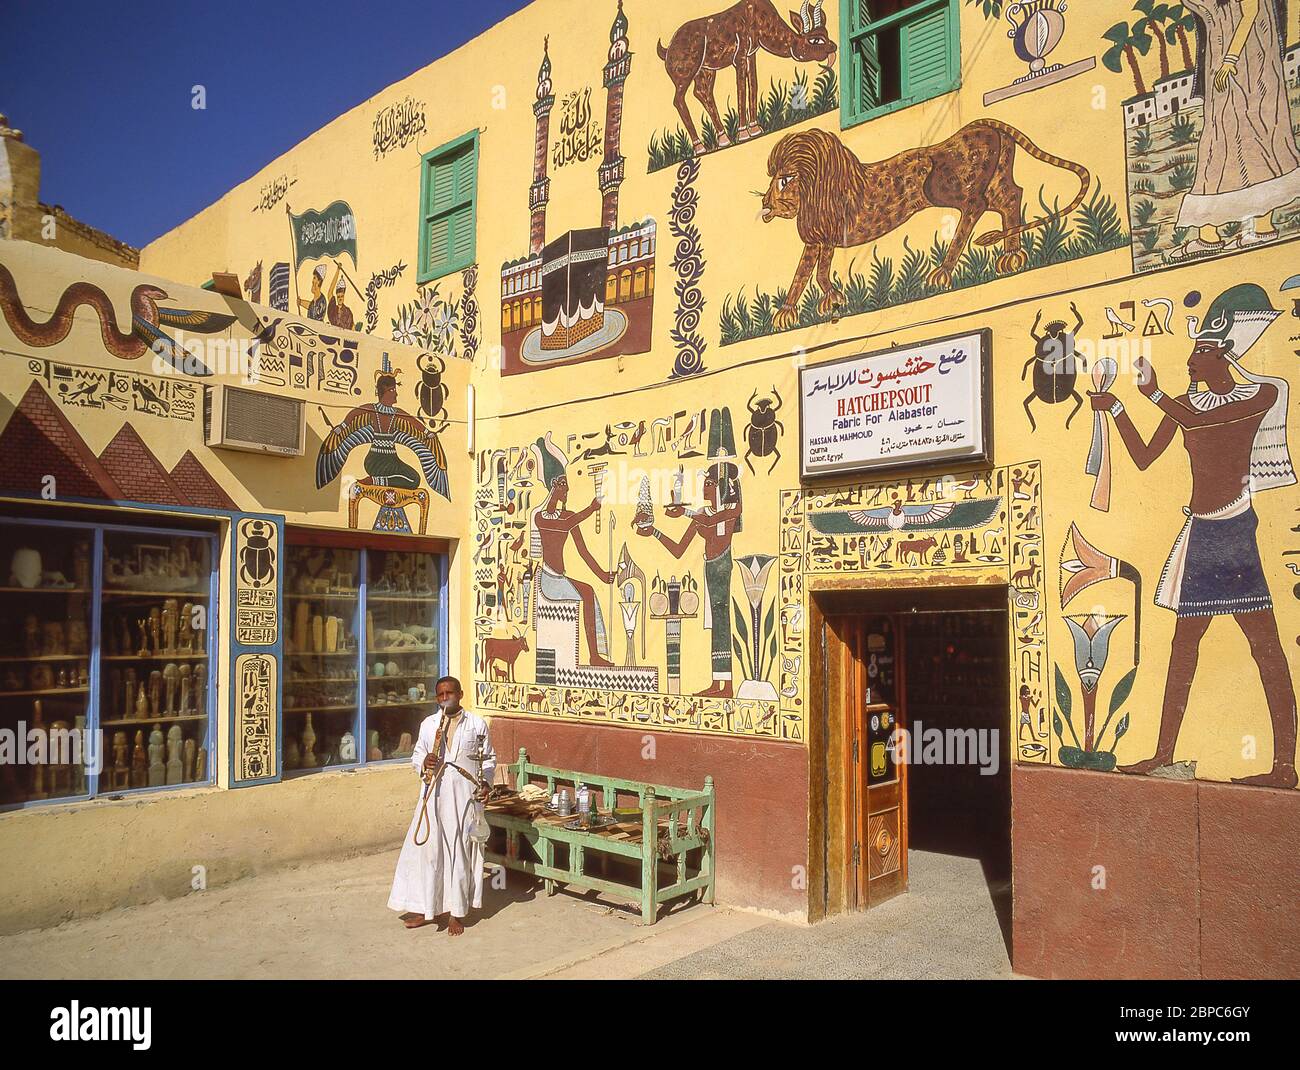 Hatchepsout alabaster shop exterior, Luxor, Luxor Governorate, Republic of Egypt Stock Photo